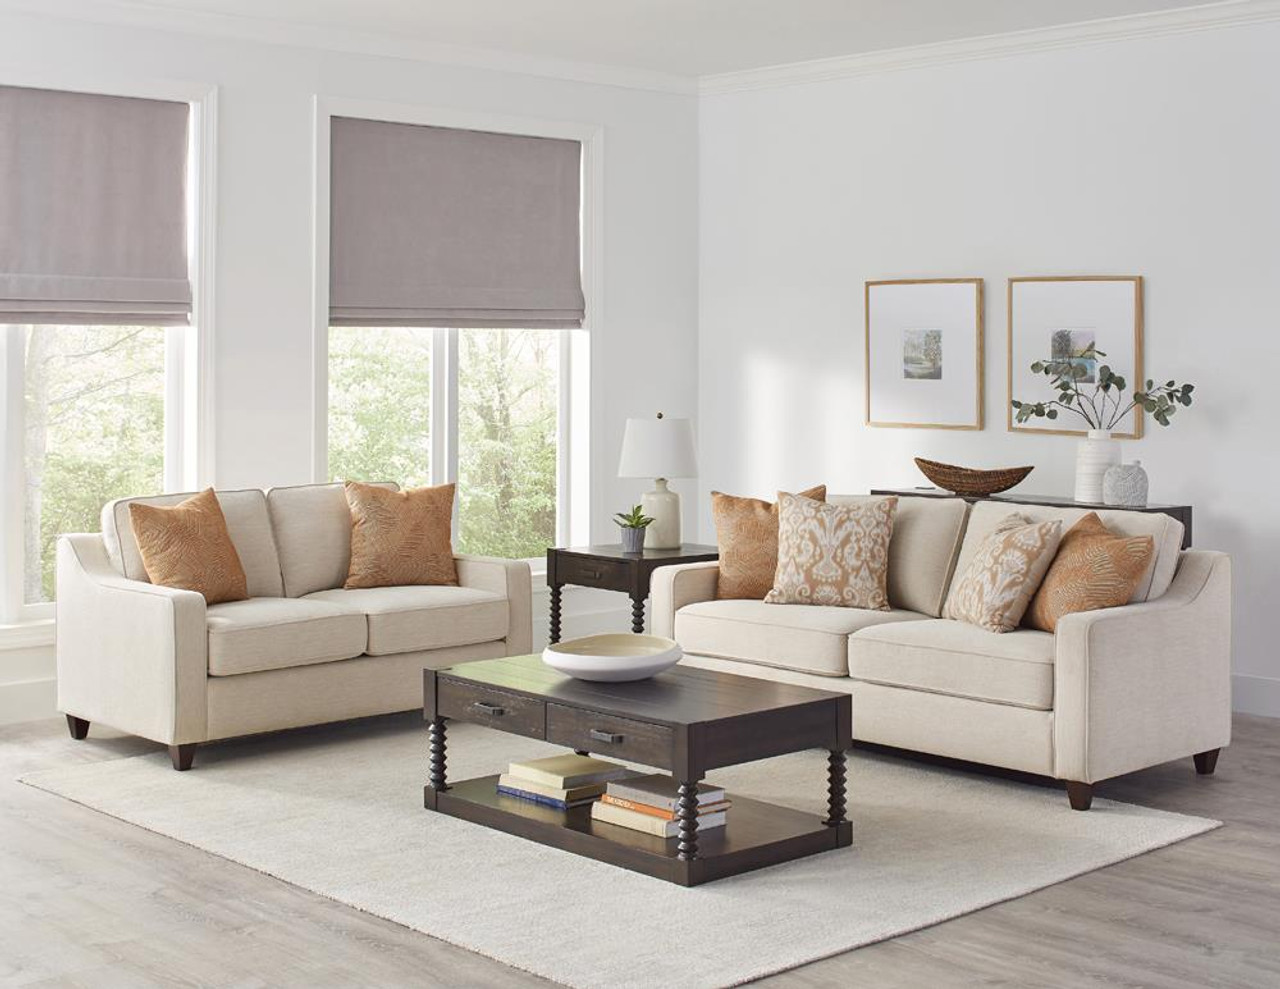 The Beige - 2pc (sofa+loveseat) - (552061-S2) available at Jake's  Furnishings serving Lincoln, IL.